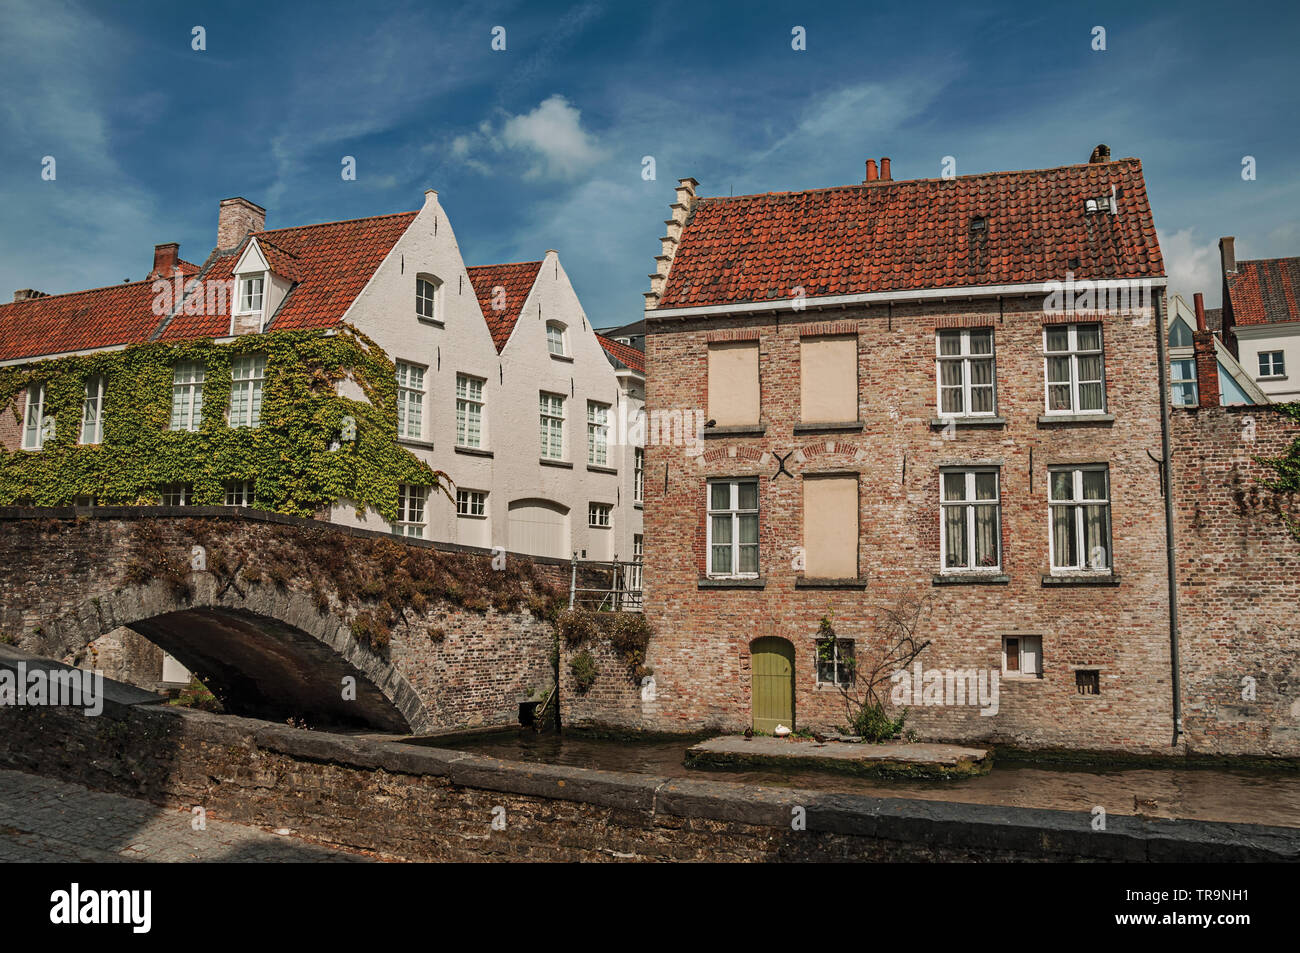 Bridge and brick buildings with creeper on the canal edge in a sunny day at Bruges. Charming town with canals and old buildings in Belgium. Stock Photo